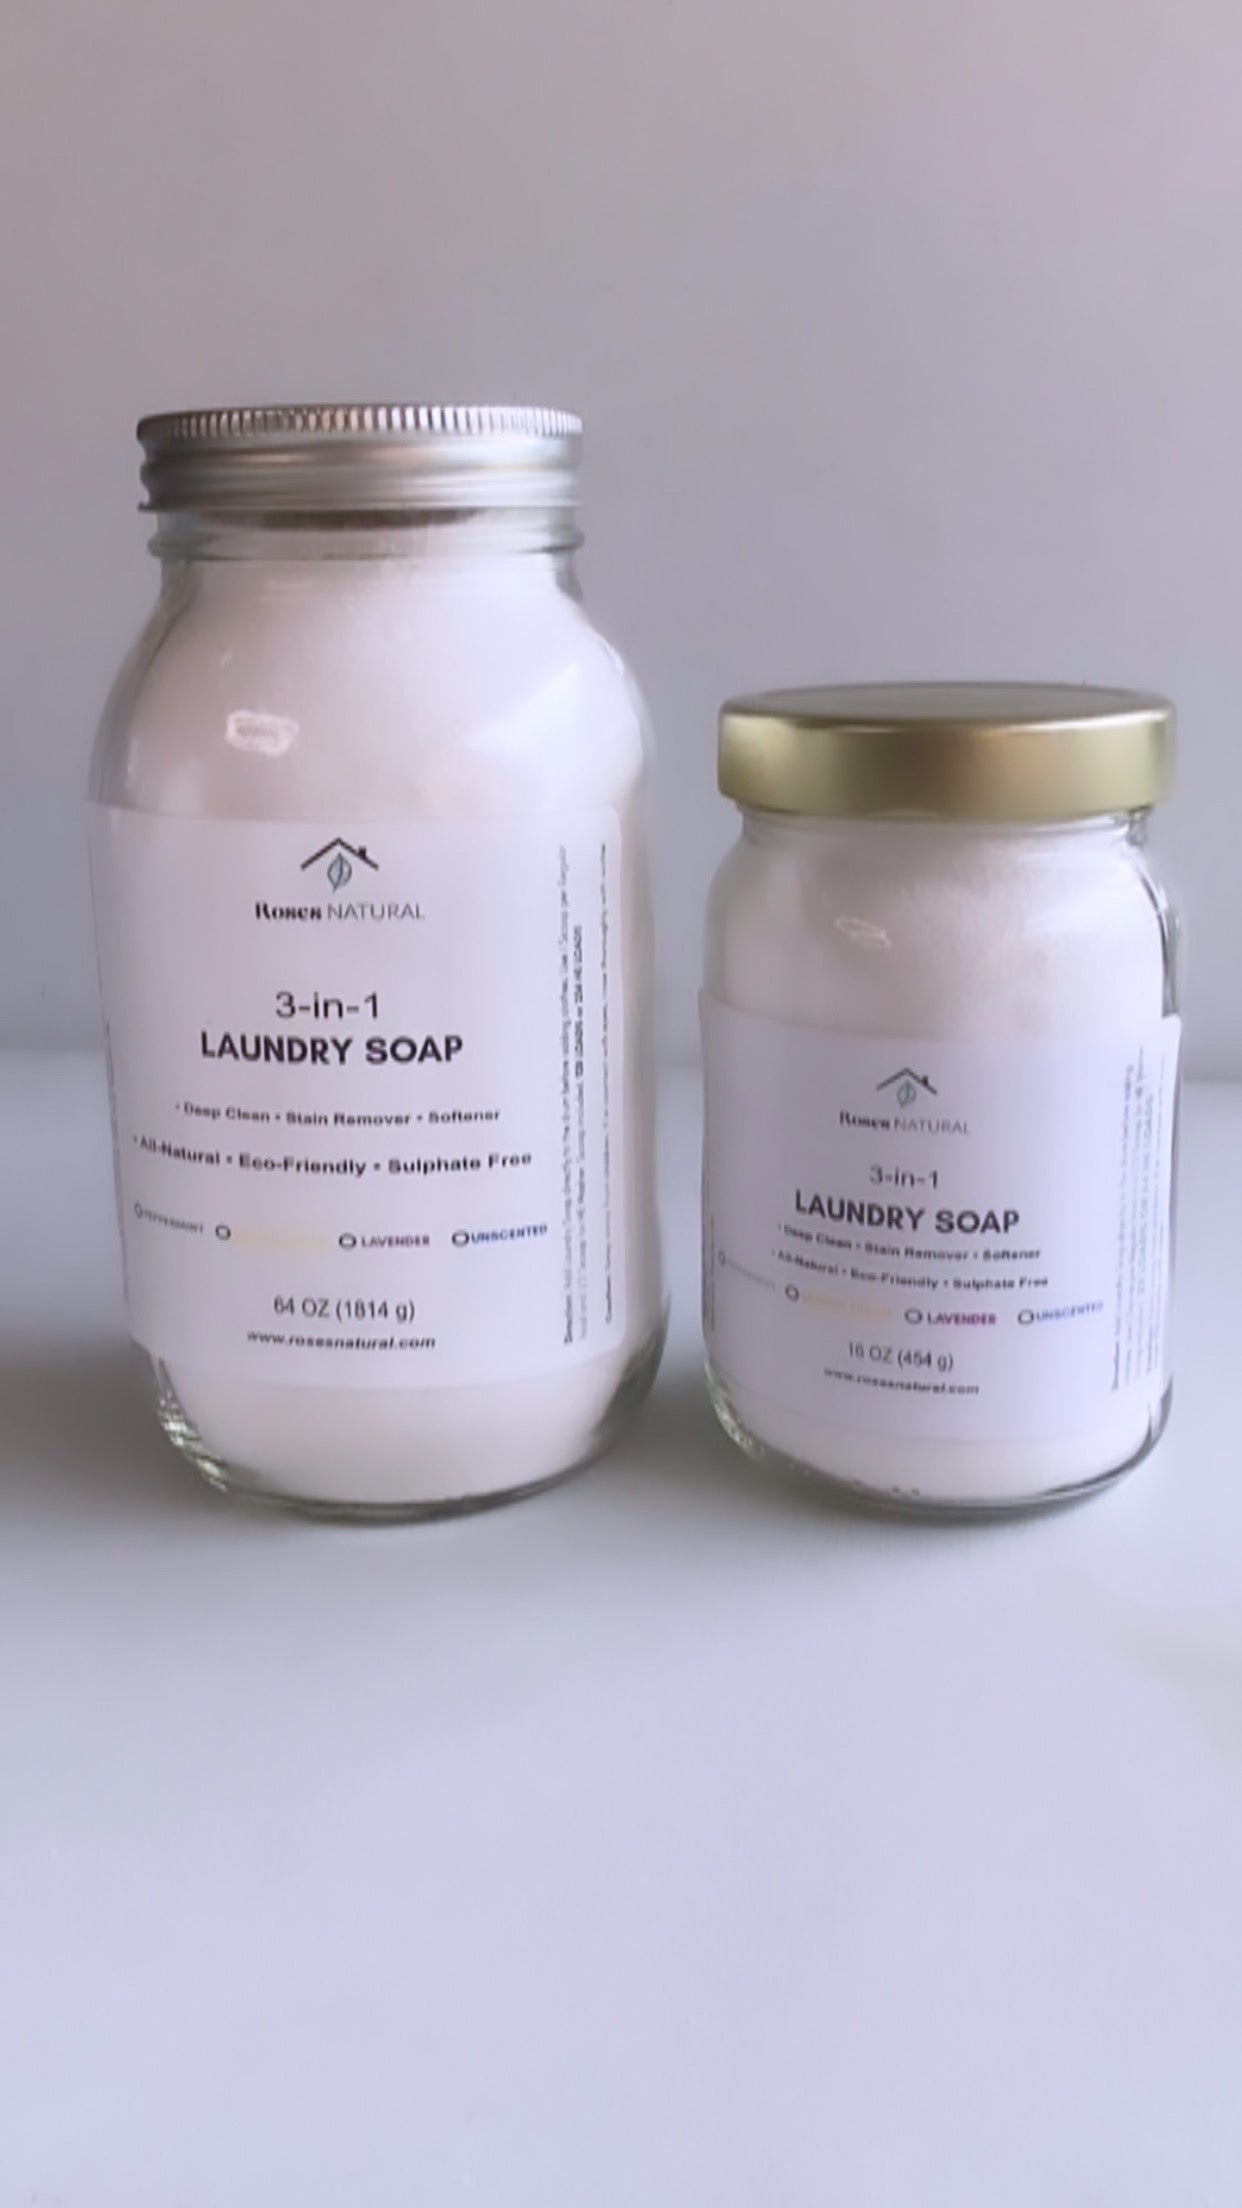 Laundry Soap - 3-in-1